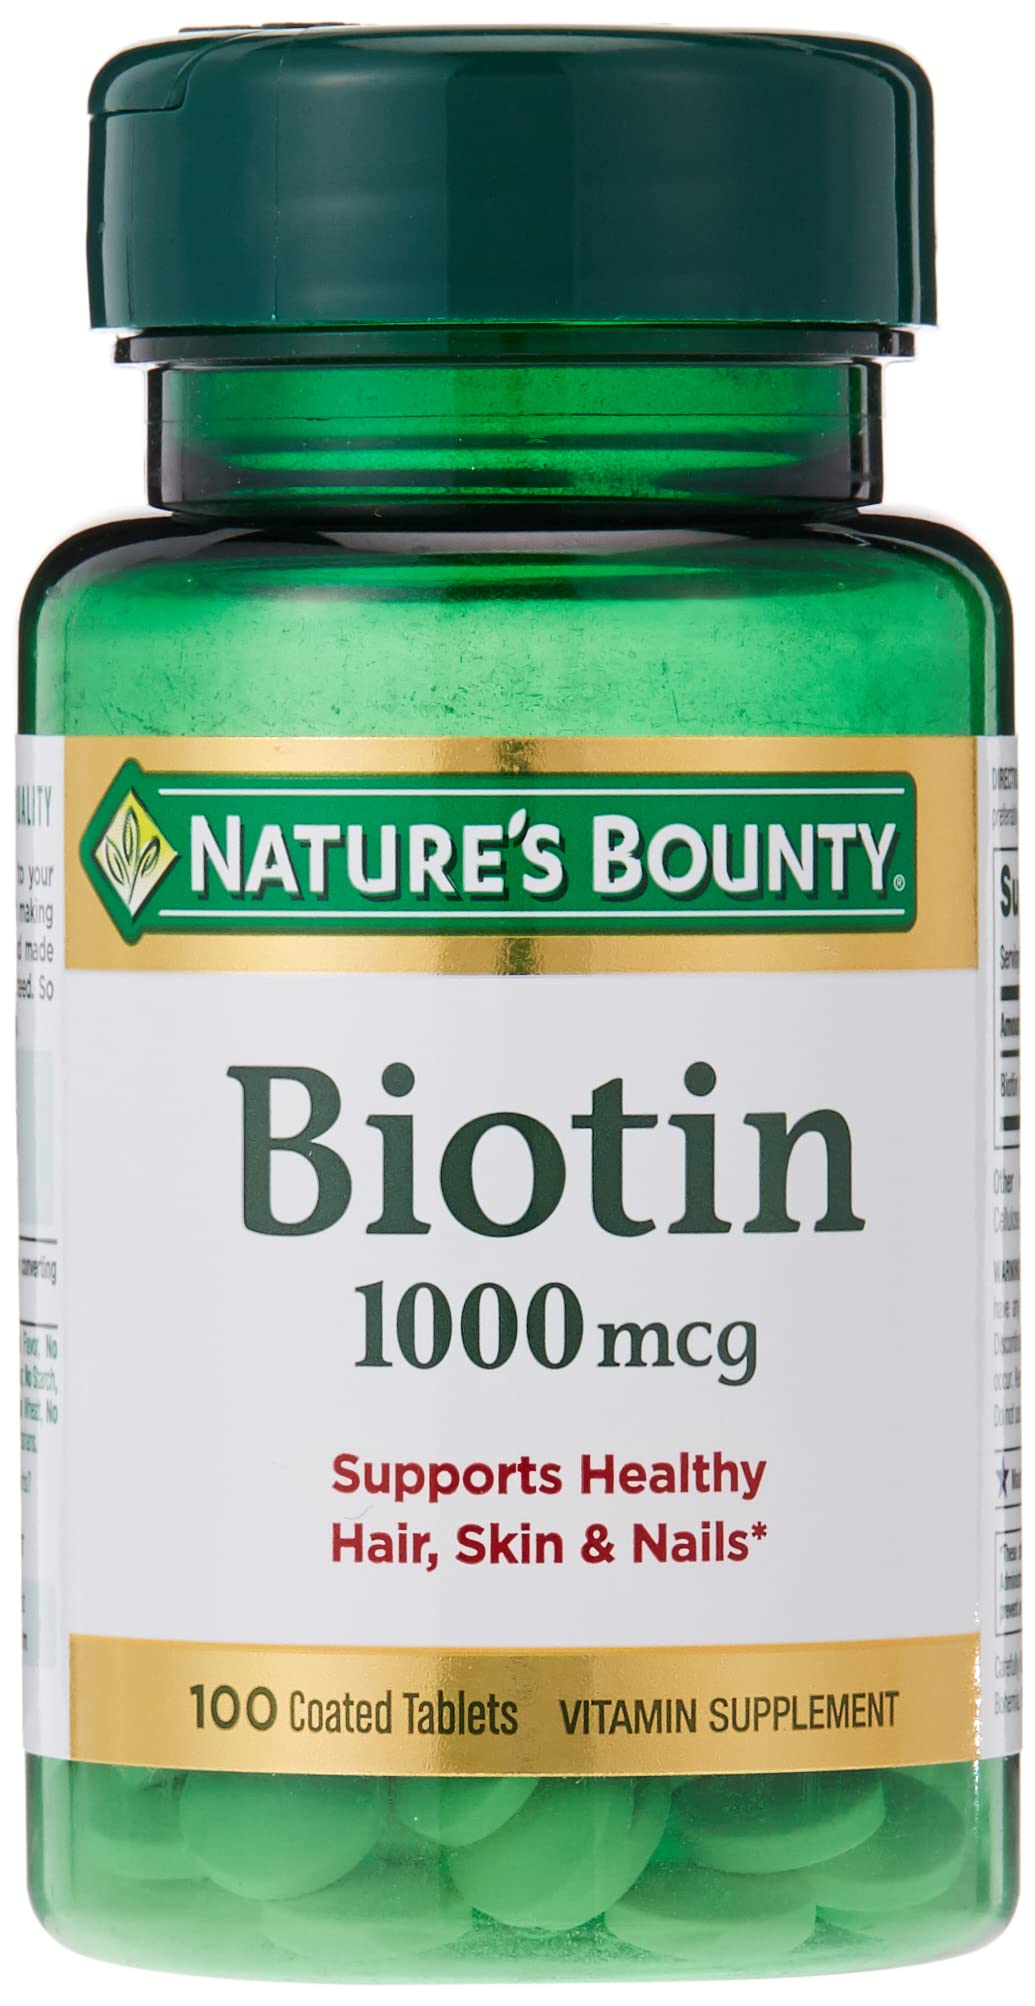 Mua Biotin by Nature's Bounty, Vitamin Supplement, Supports Metabolism for  Cellular Energy and Healthy Hair, Skin, and Nails, 1000 mcg, 100 Tablets  trên Amazon Mỹ chính hãng 2023 | Giaonhan247